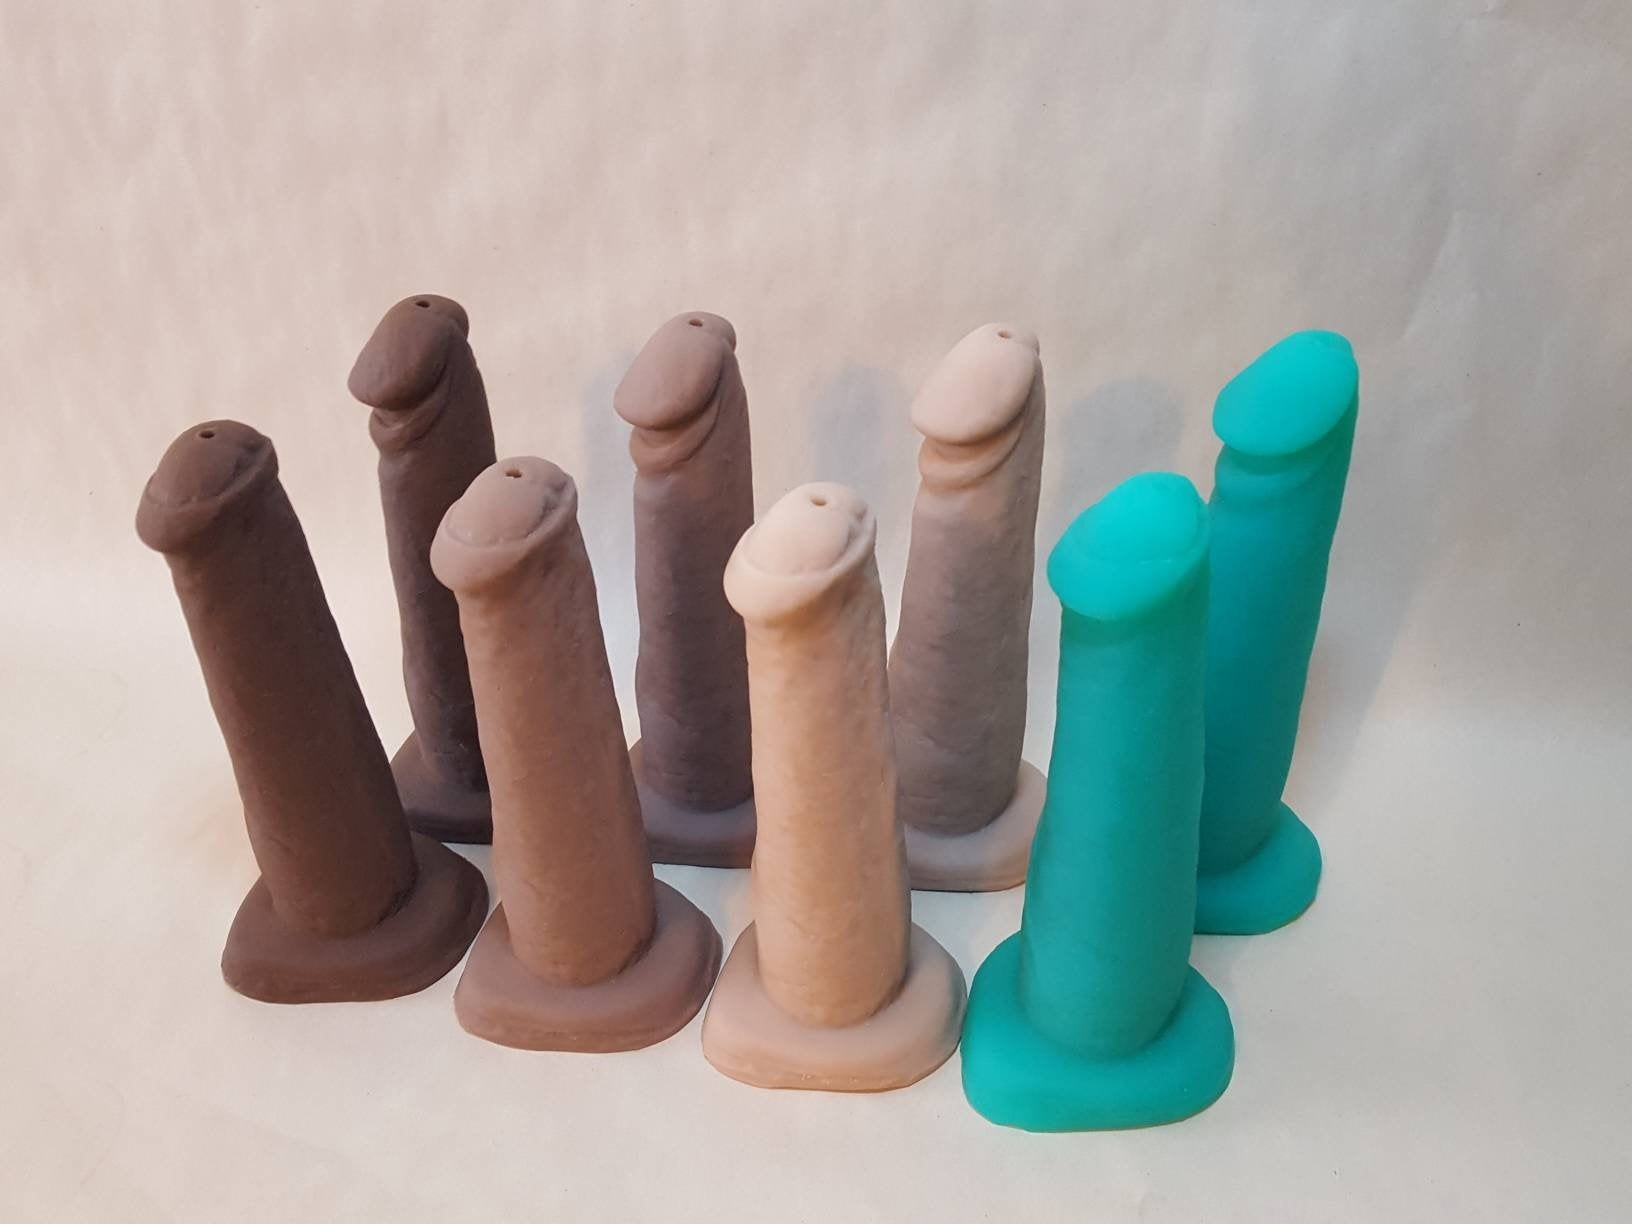 seven the BJ Dildos in various colors 